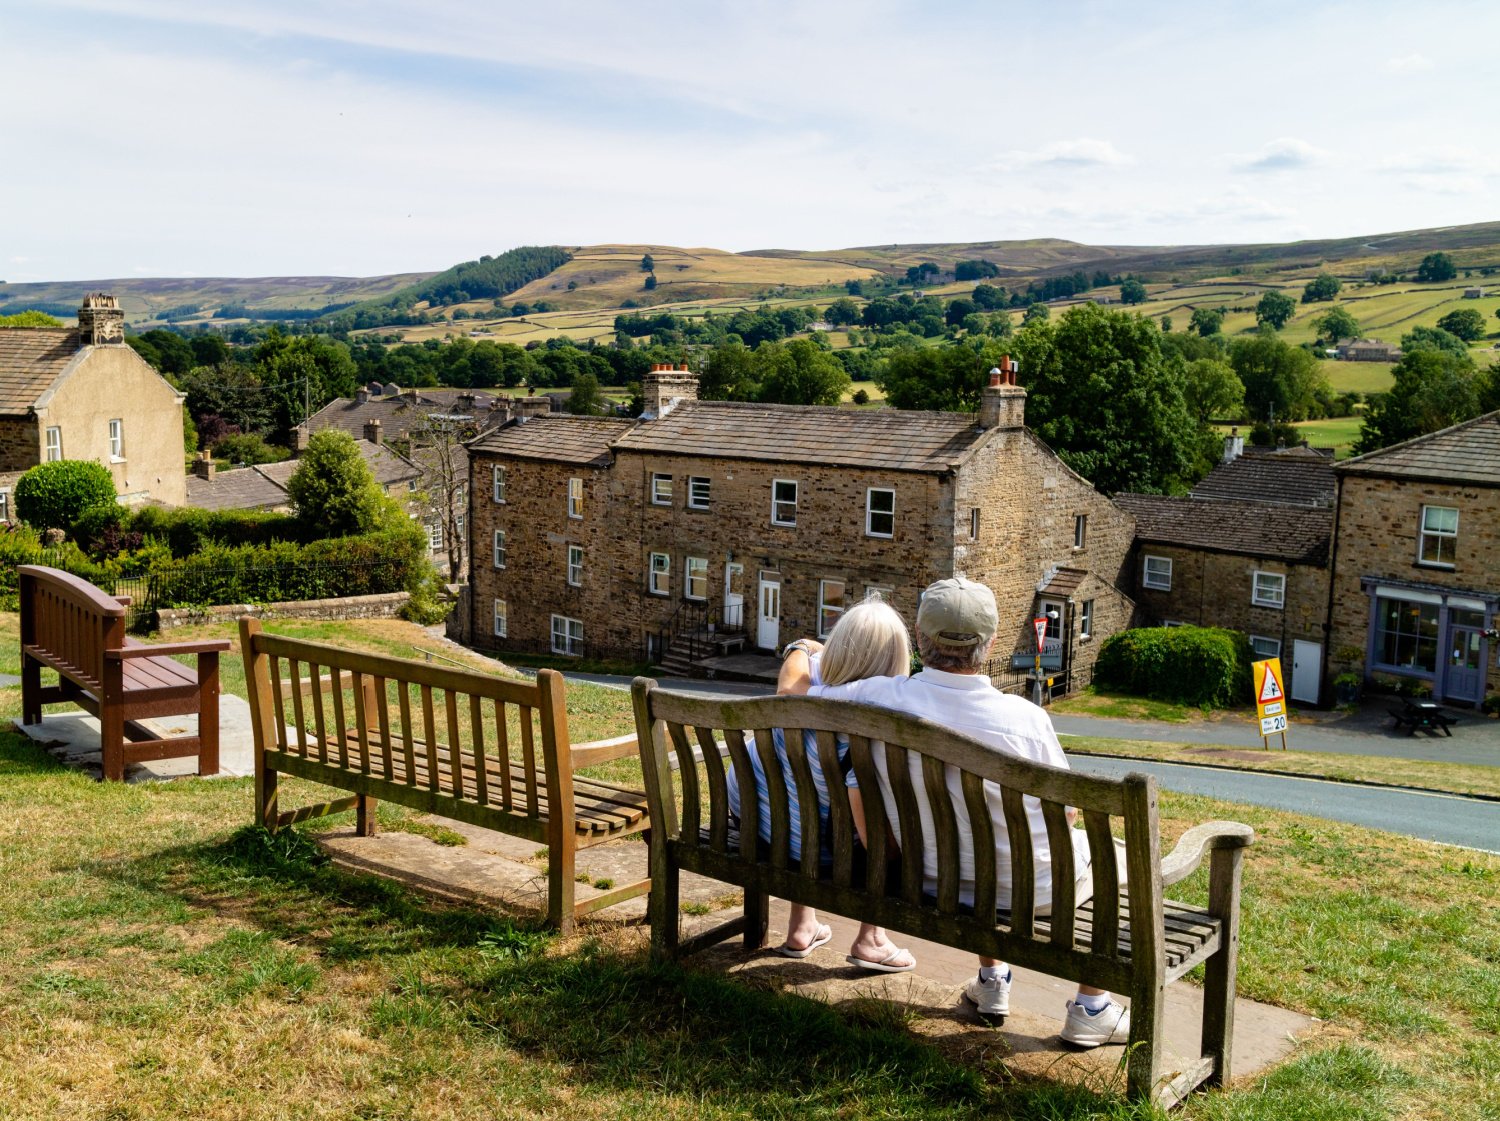 Image name elderly couple bench yorkshire the 1 image from the post Romantic Valentine's Getaways in Yorkshire: From Magical Proposals to Cosy Stays in Yorkshire.com.